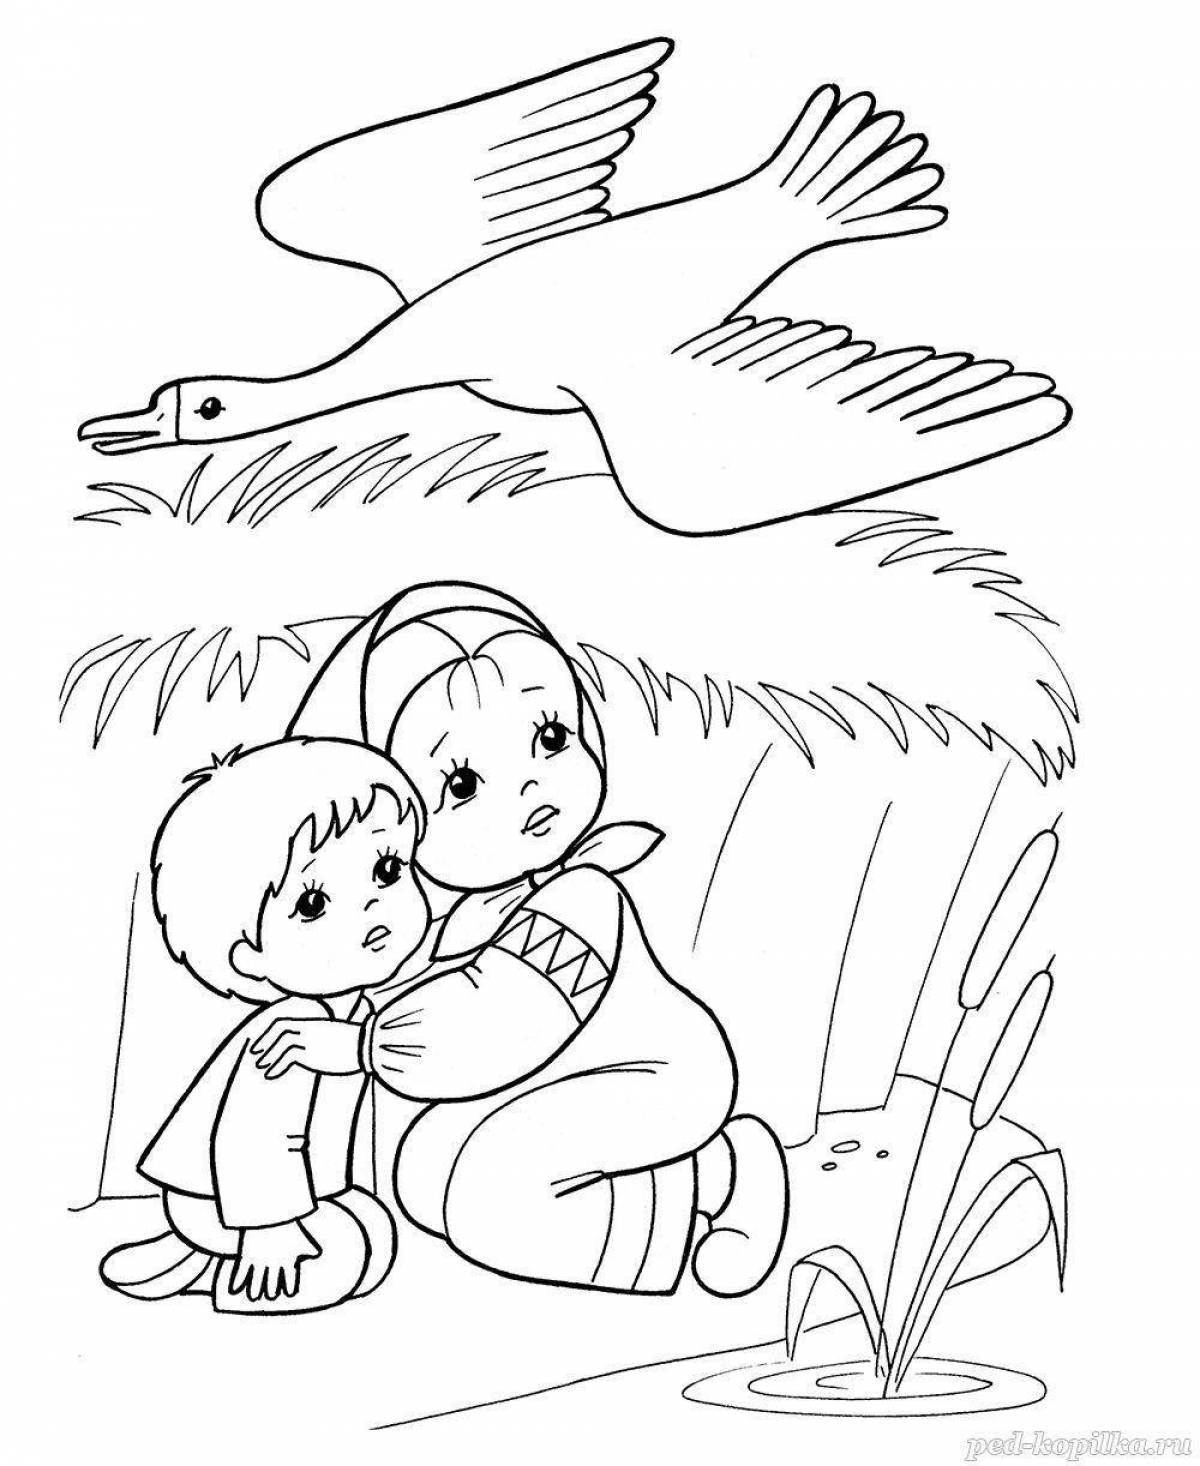 Fine swan geese coloring page